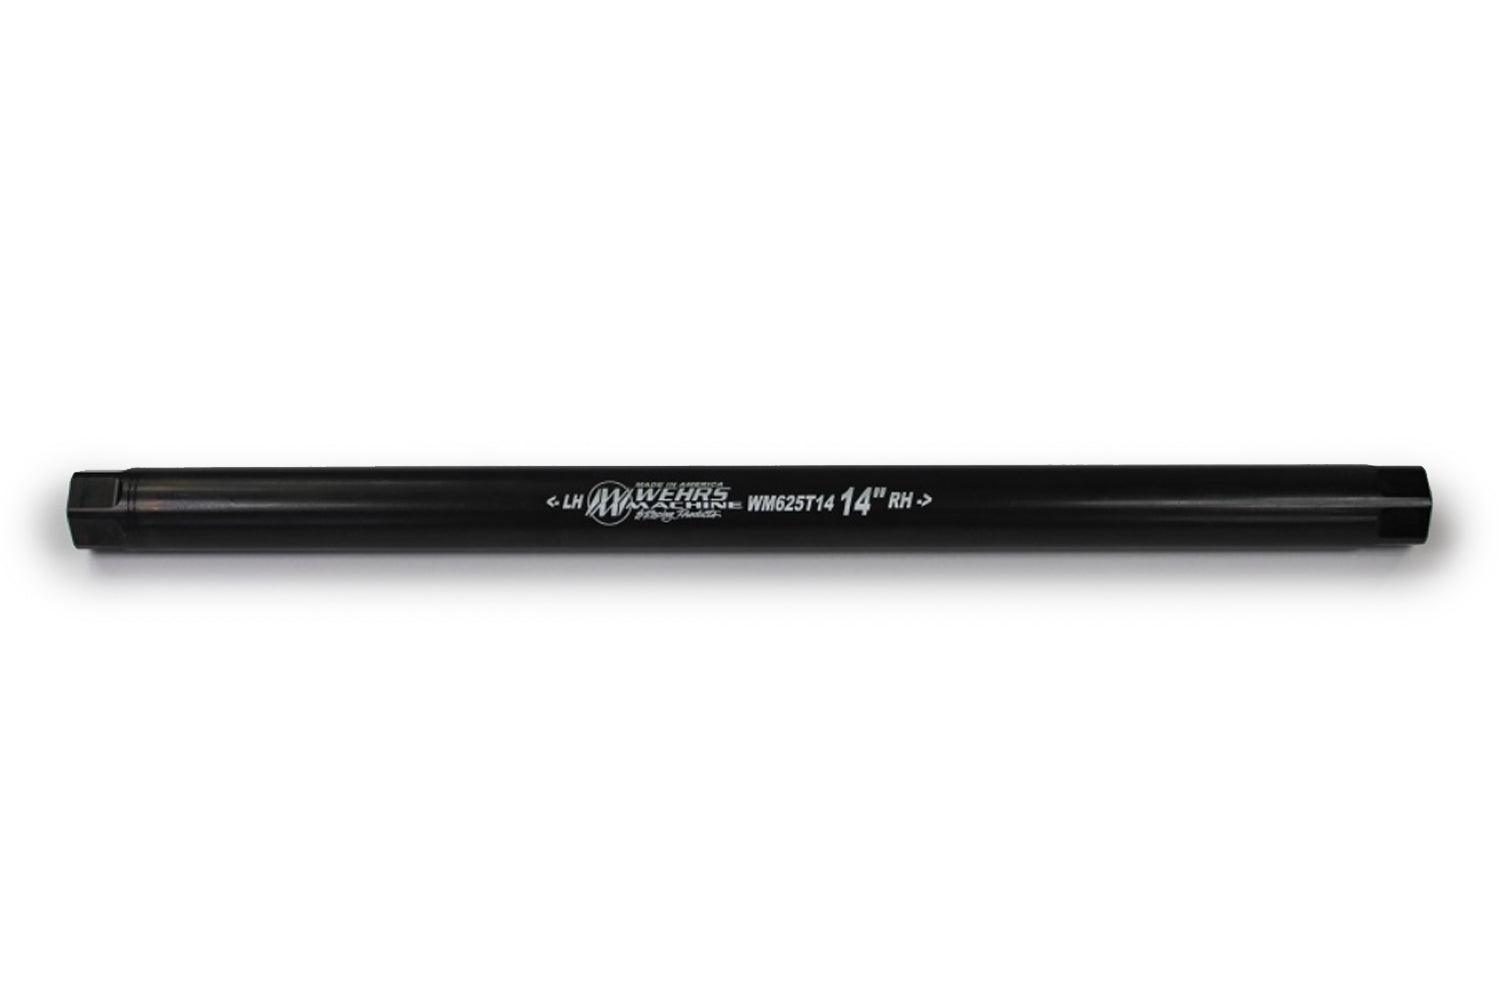 Suspension Tube 14in x 5/8 -18 Thd - Burlile Performance Products